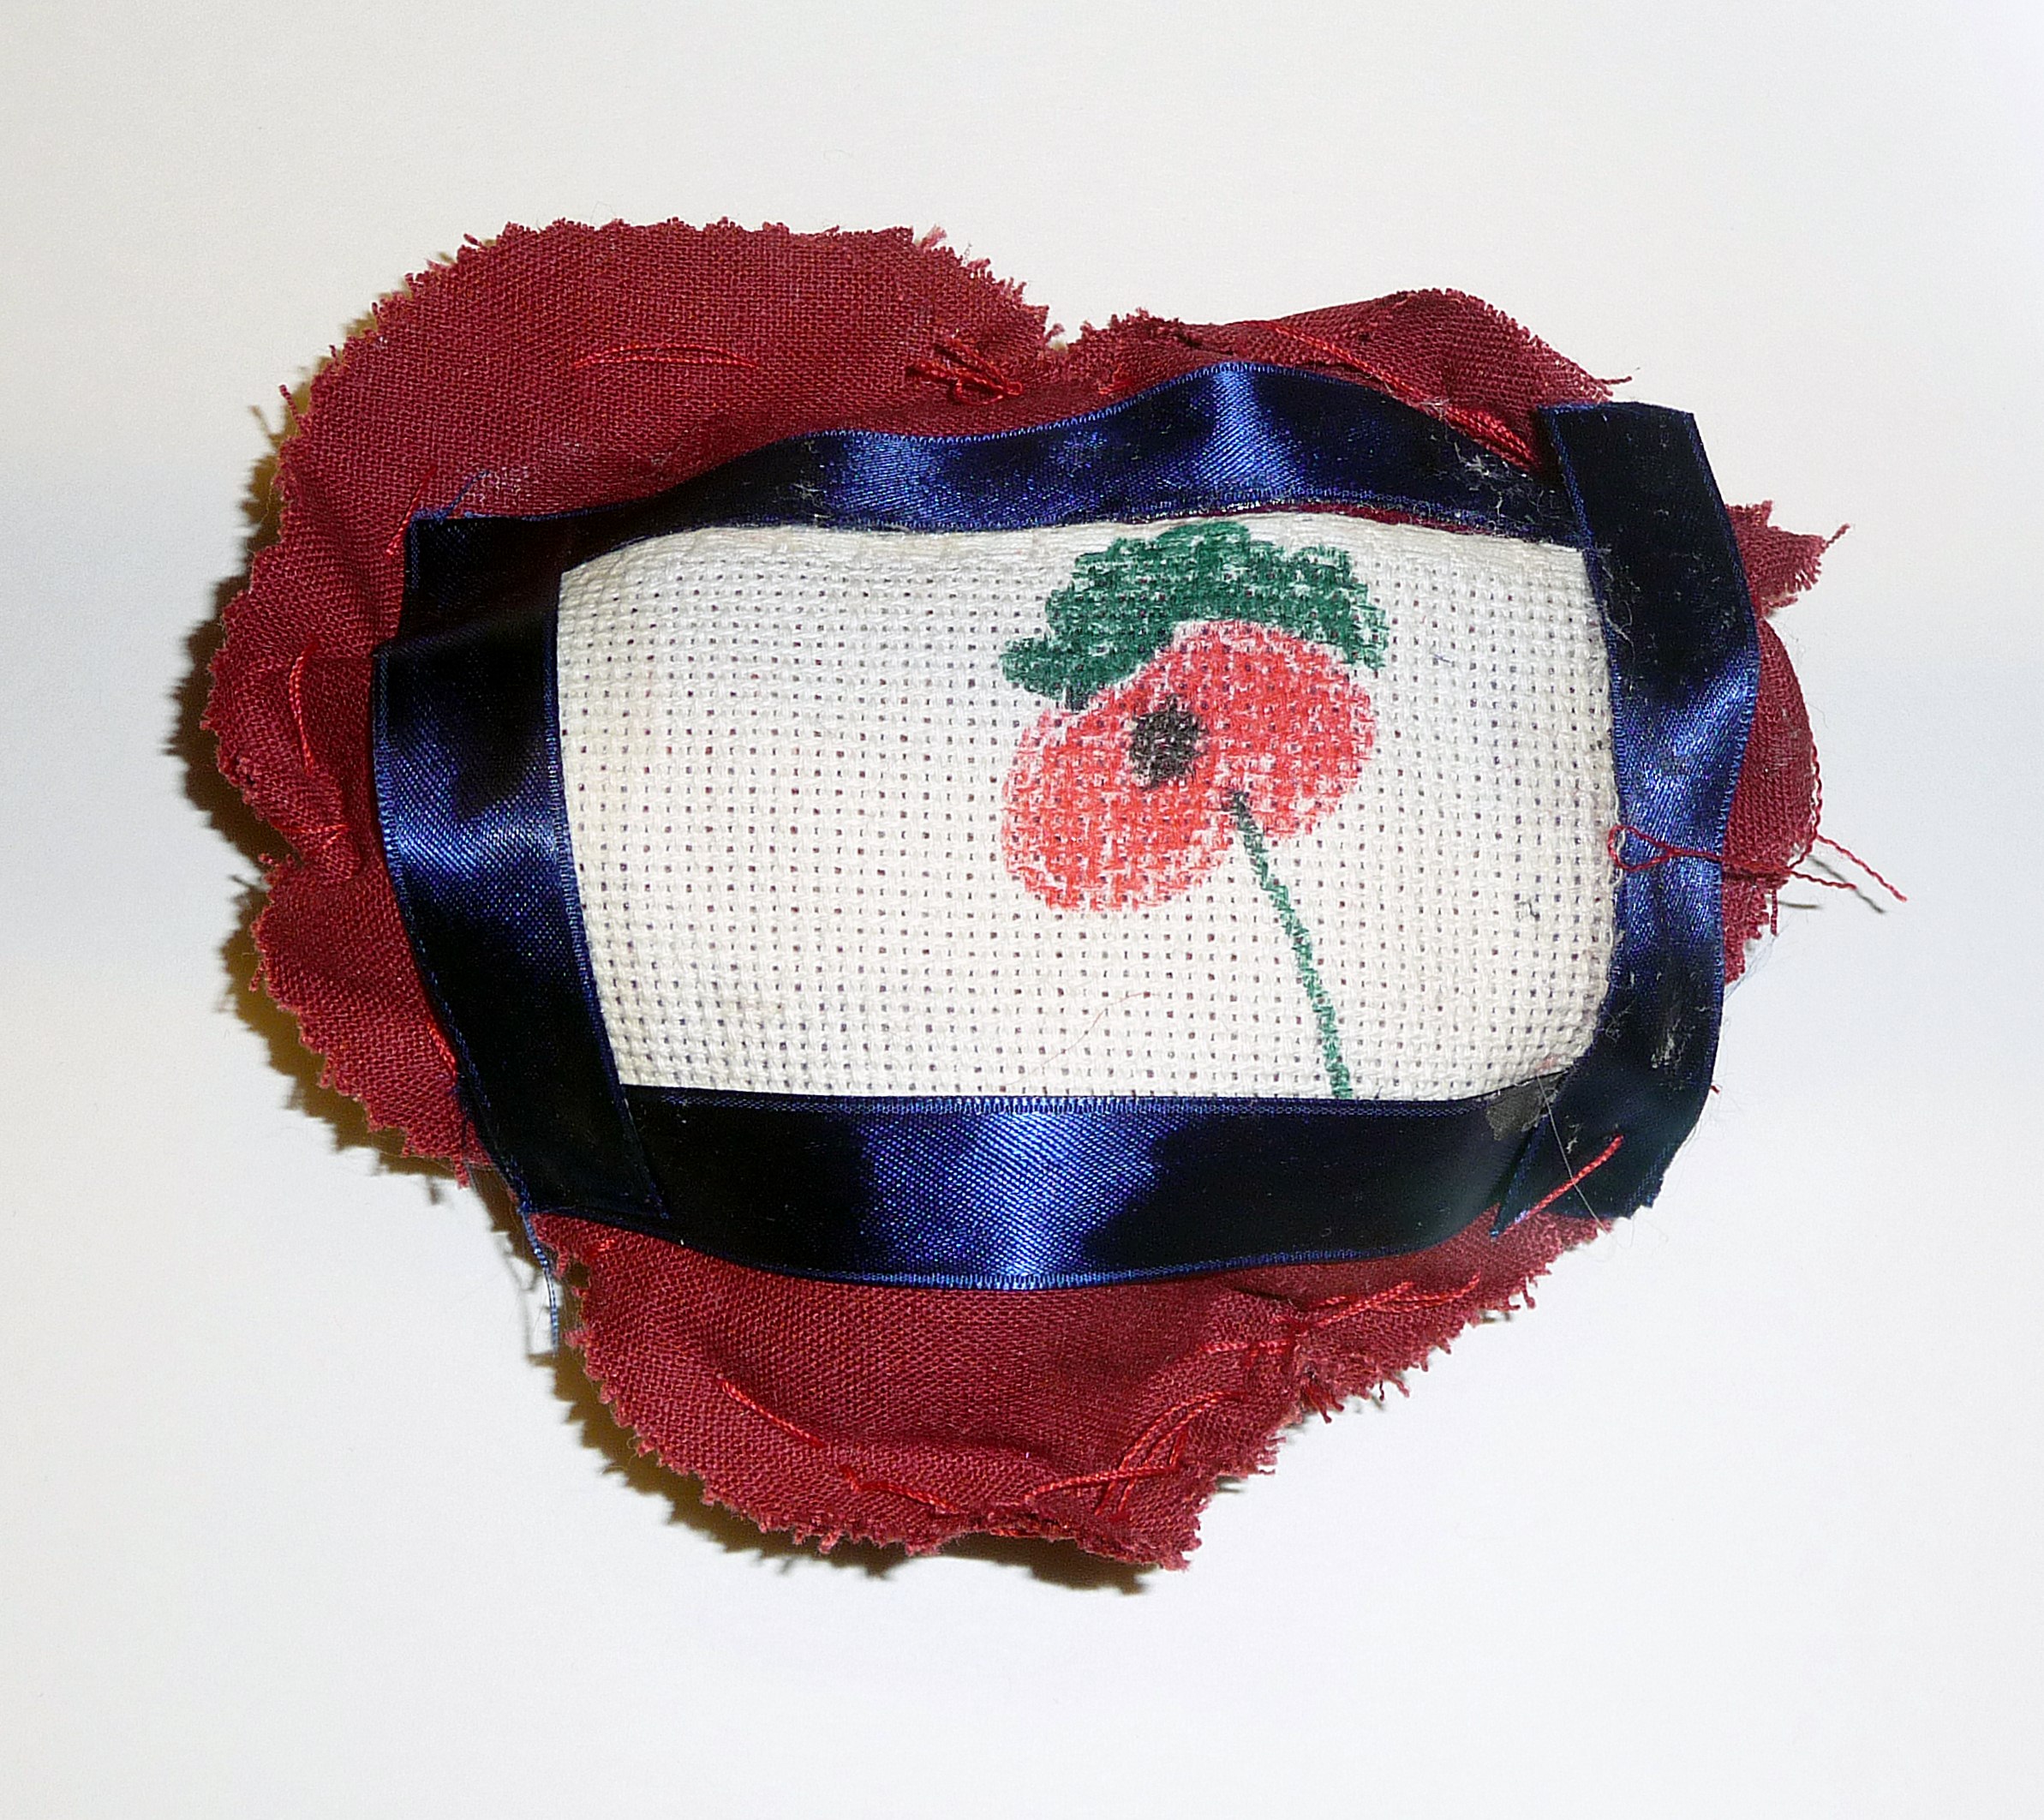 pincushion to commemorate World War 1 made by Liam Appleton from Lansbury Bridge School, St Helens